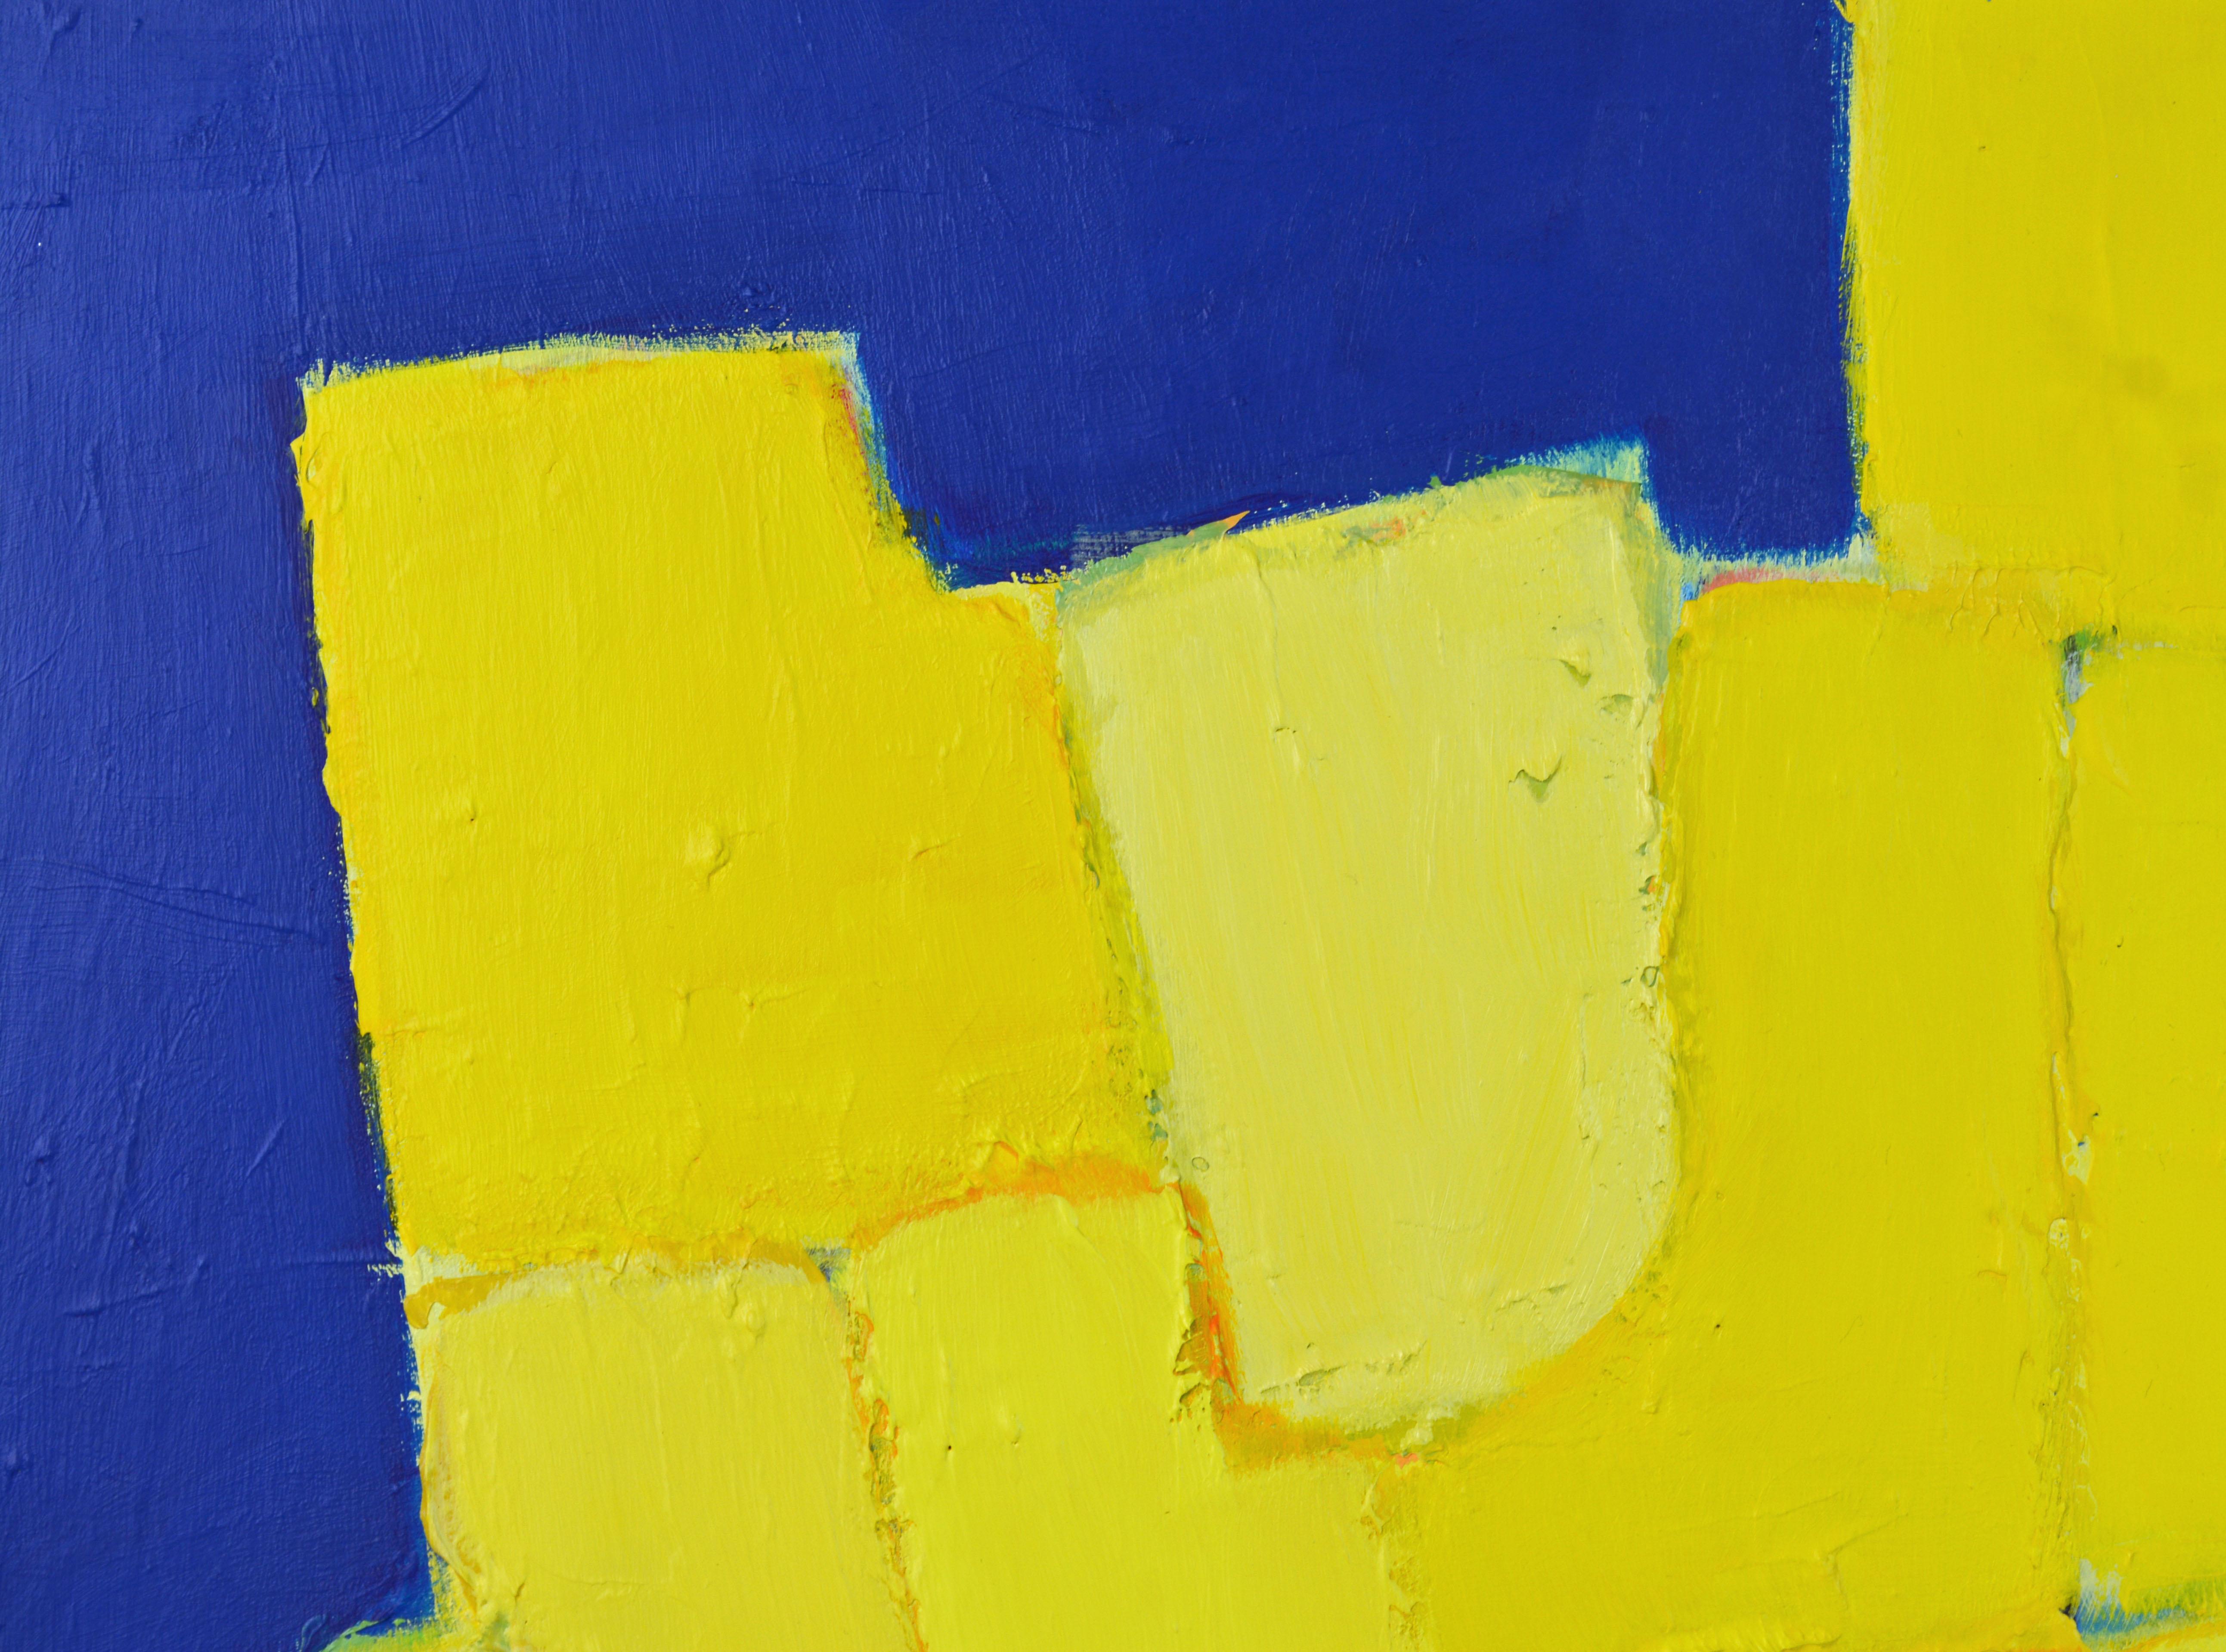 Painted 'Composition Jaune sur Fond Bleu' Original Abstract Painting by Lars Hegelund